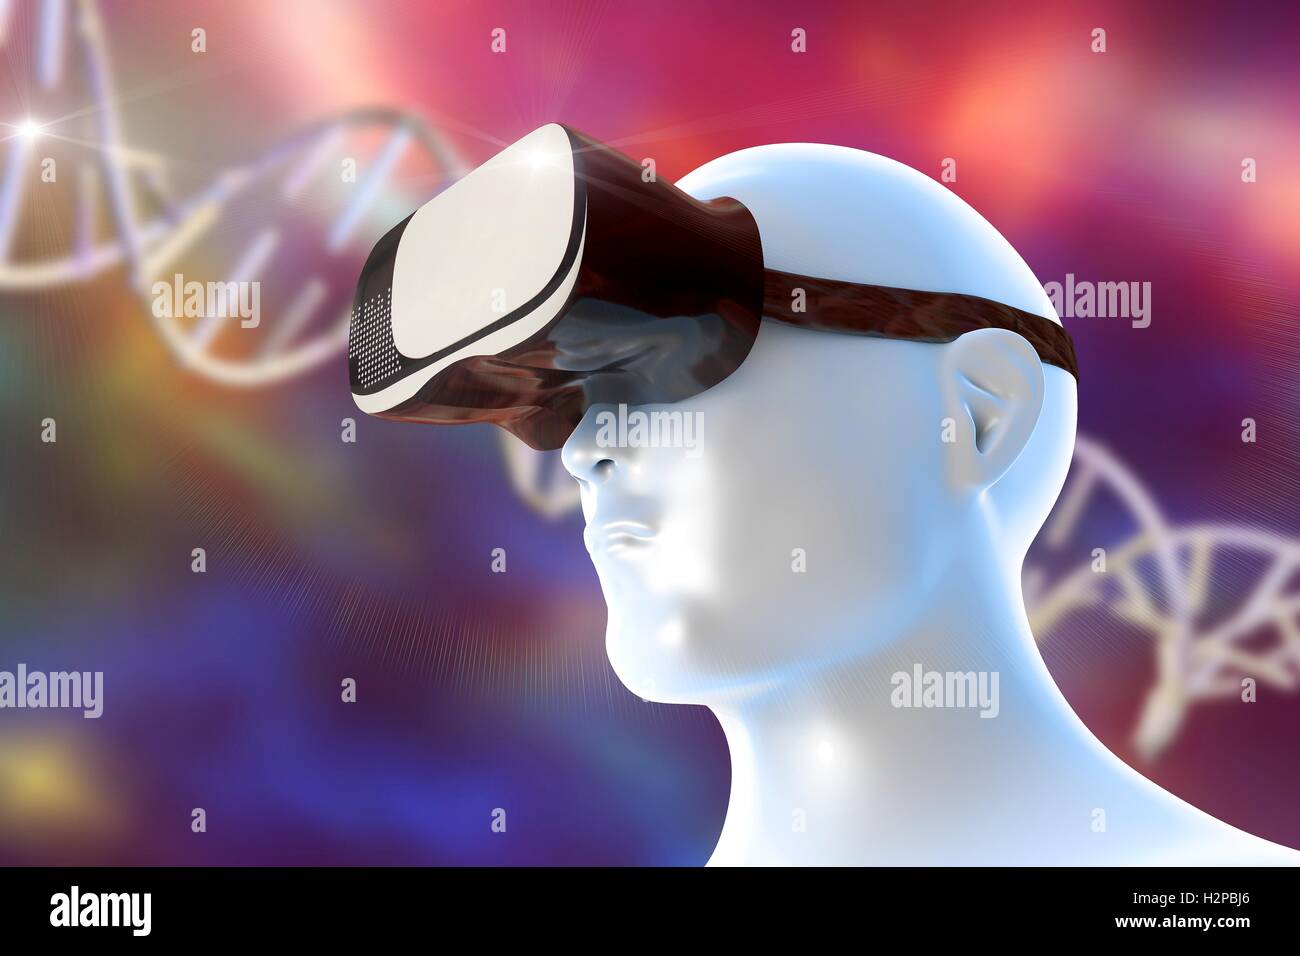 Human head wearing a virtual reality headset. Conceptual image showing perspective of virtual reality in biomedical education and science. A DNA (deoxyribonucleic acid) molecule is in the background. Stock Photo